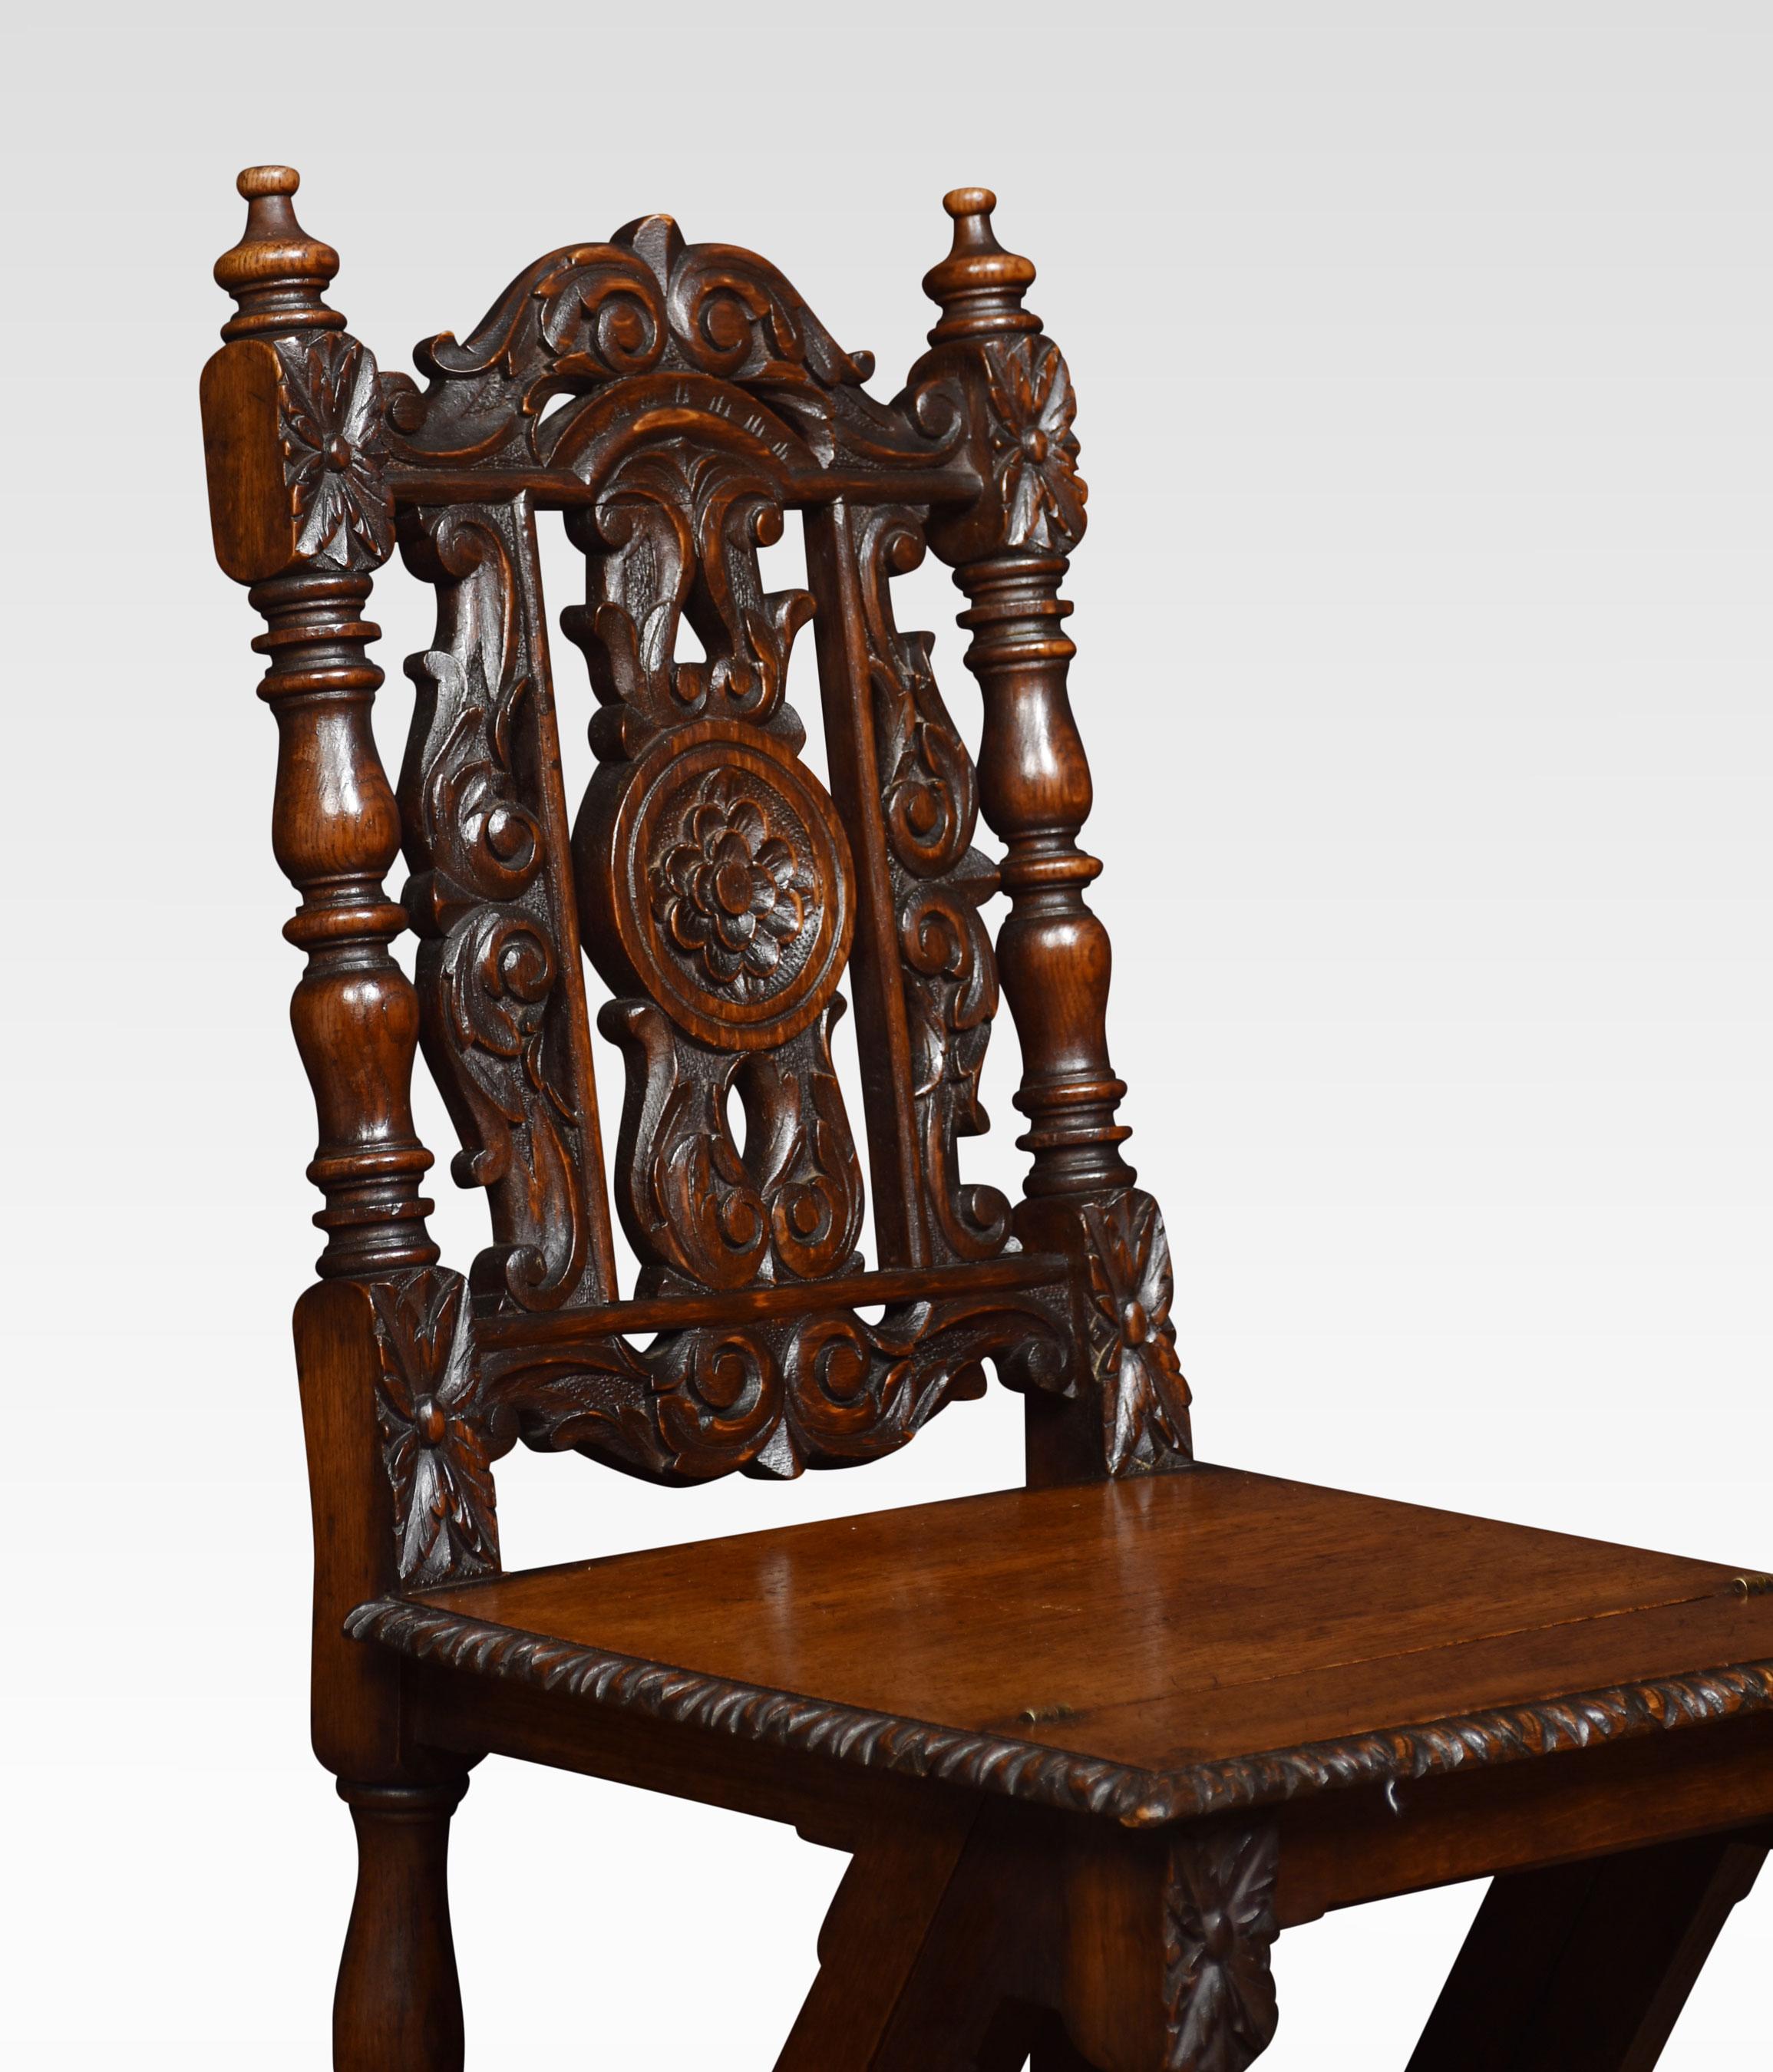 Oak metamorphic chair, in Jacobean style the panelled back with pierced decoration with scrolling foliage. To the solid oak hinged seat folding to form a set of library steps.
Dimensions
Height 37 Inches height to seat 18.5 Inches
Width 17